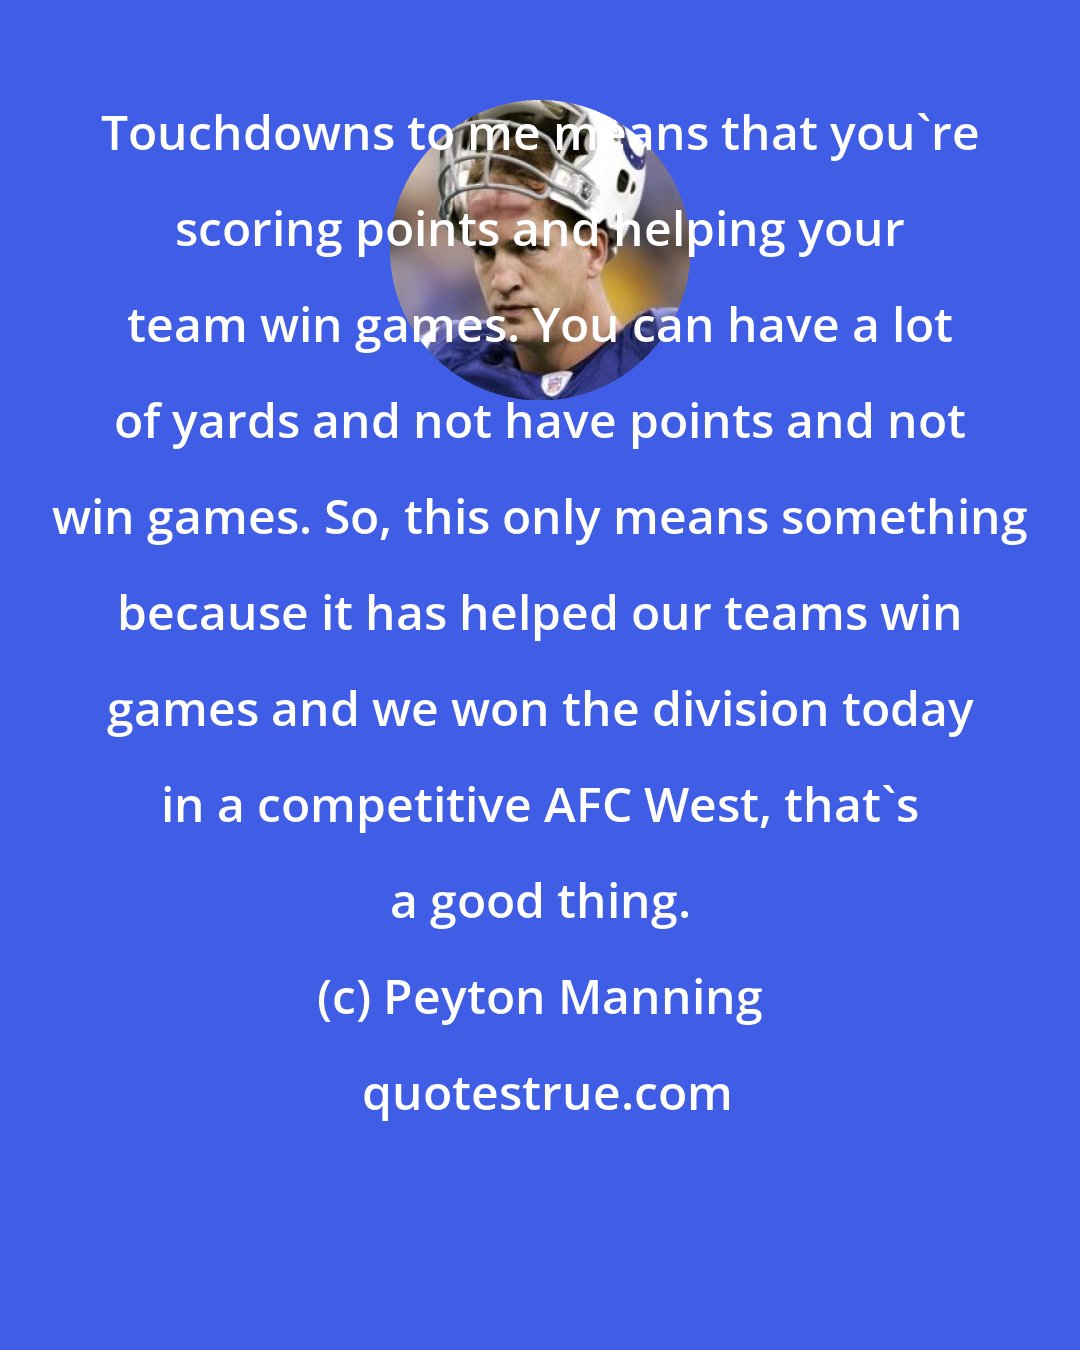 Peyton Manning: Touchdowns to me means that you're scoring points and helping your team win games. You can have a lot of yards and not have points and not win games. So, this only means something because it has helped our teams win games and we won the division today in a competitive AFC West, that's a good thing.